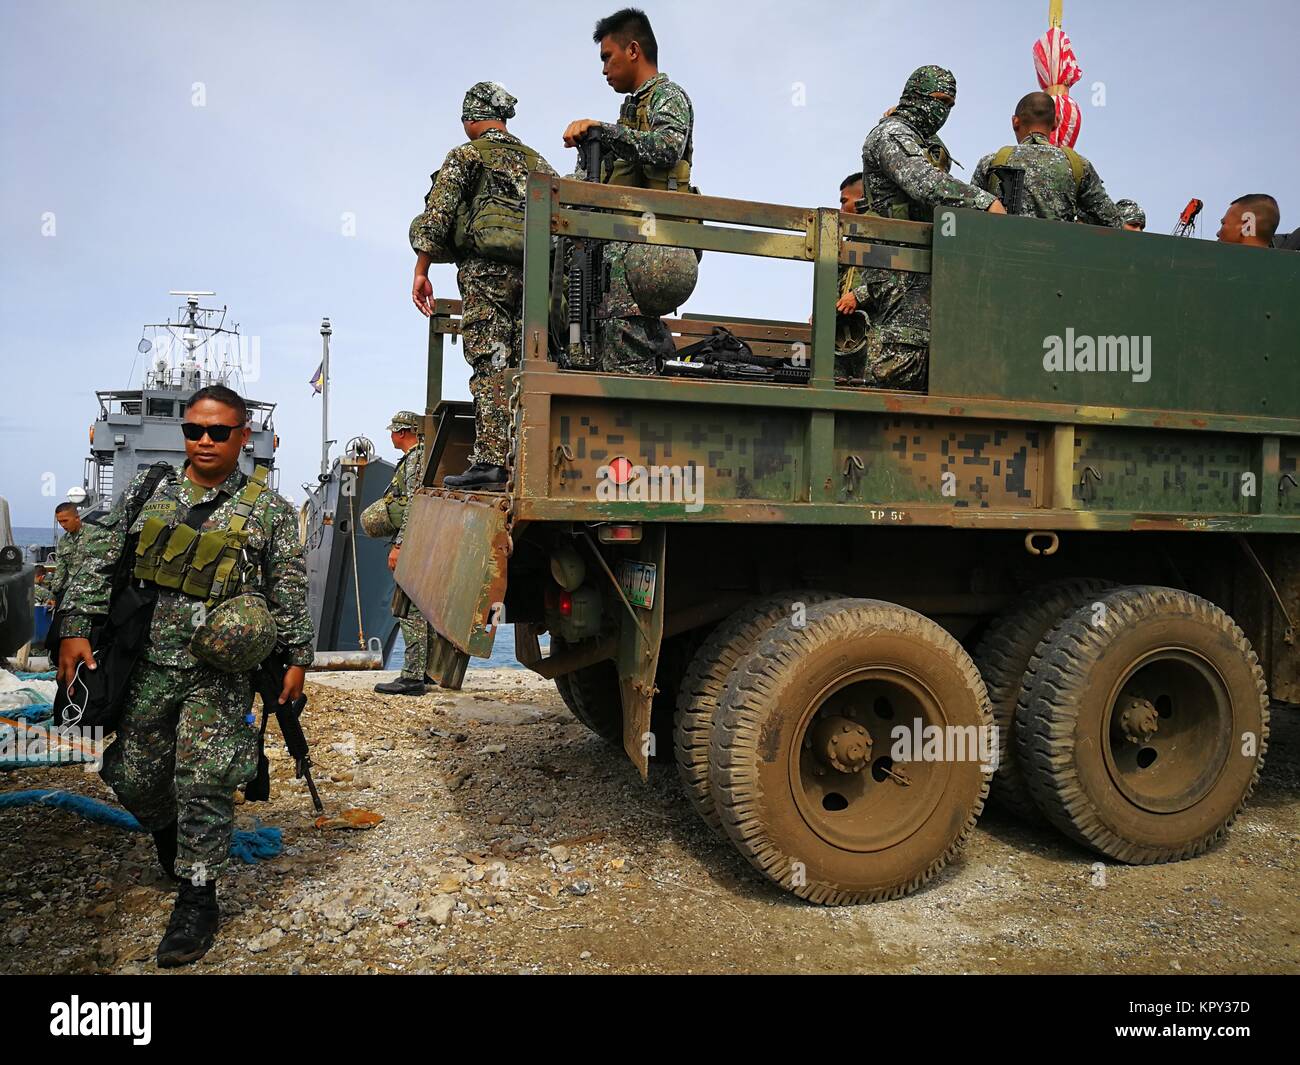 Government troops continue its heavy presence in Jolo, Sulu as war on terror campaign intensifies to crack down terrorism and extremism in the region. Sherbien Dacalanio/Pacific Press Stock Photo